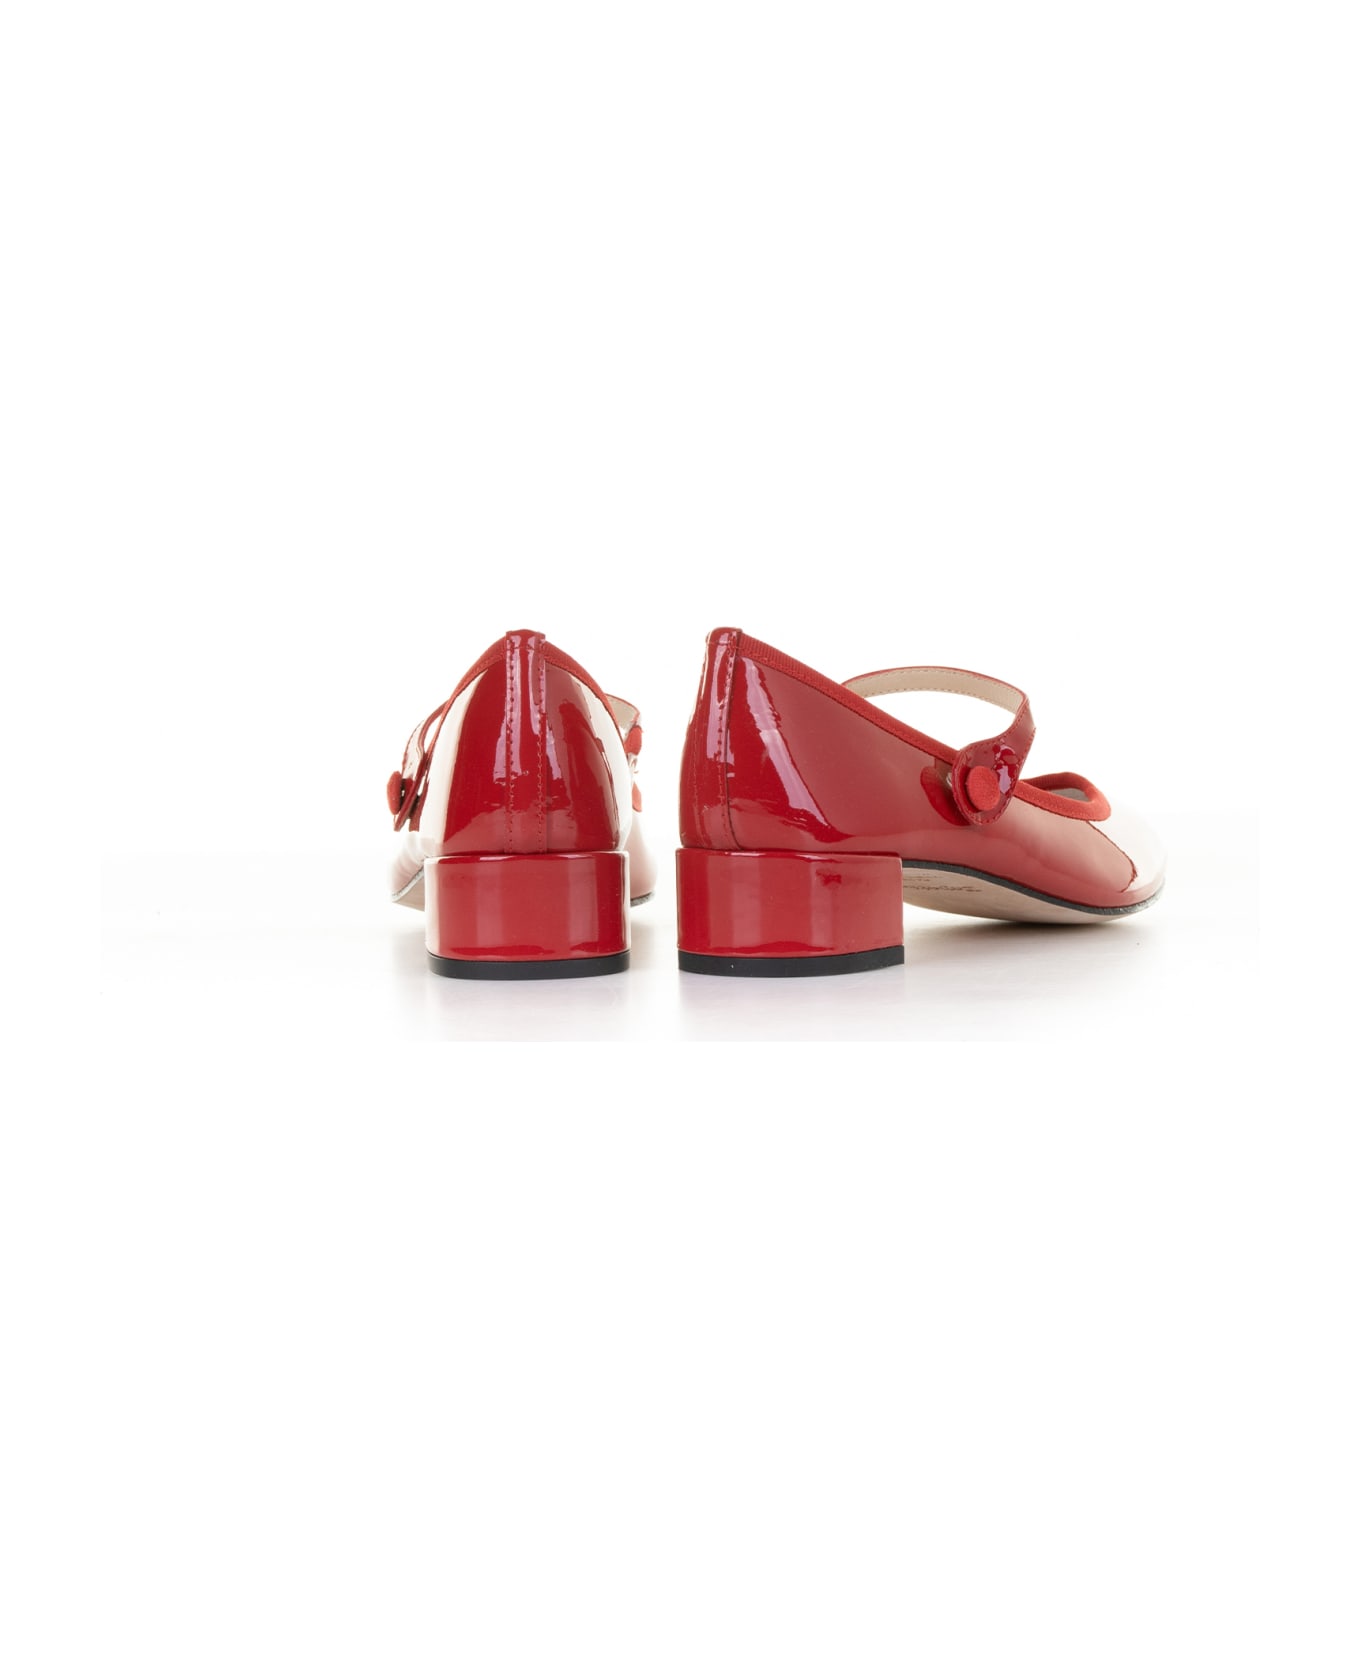 Repetto Ballerina In Shiny Leather With Strap - FLAMME